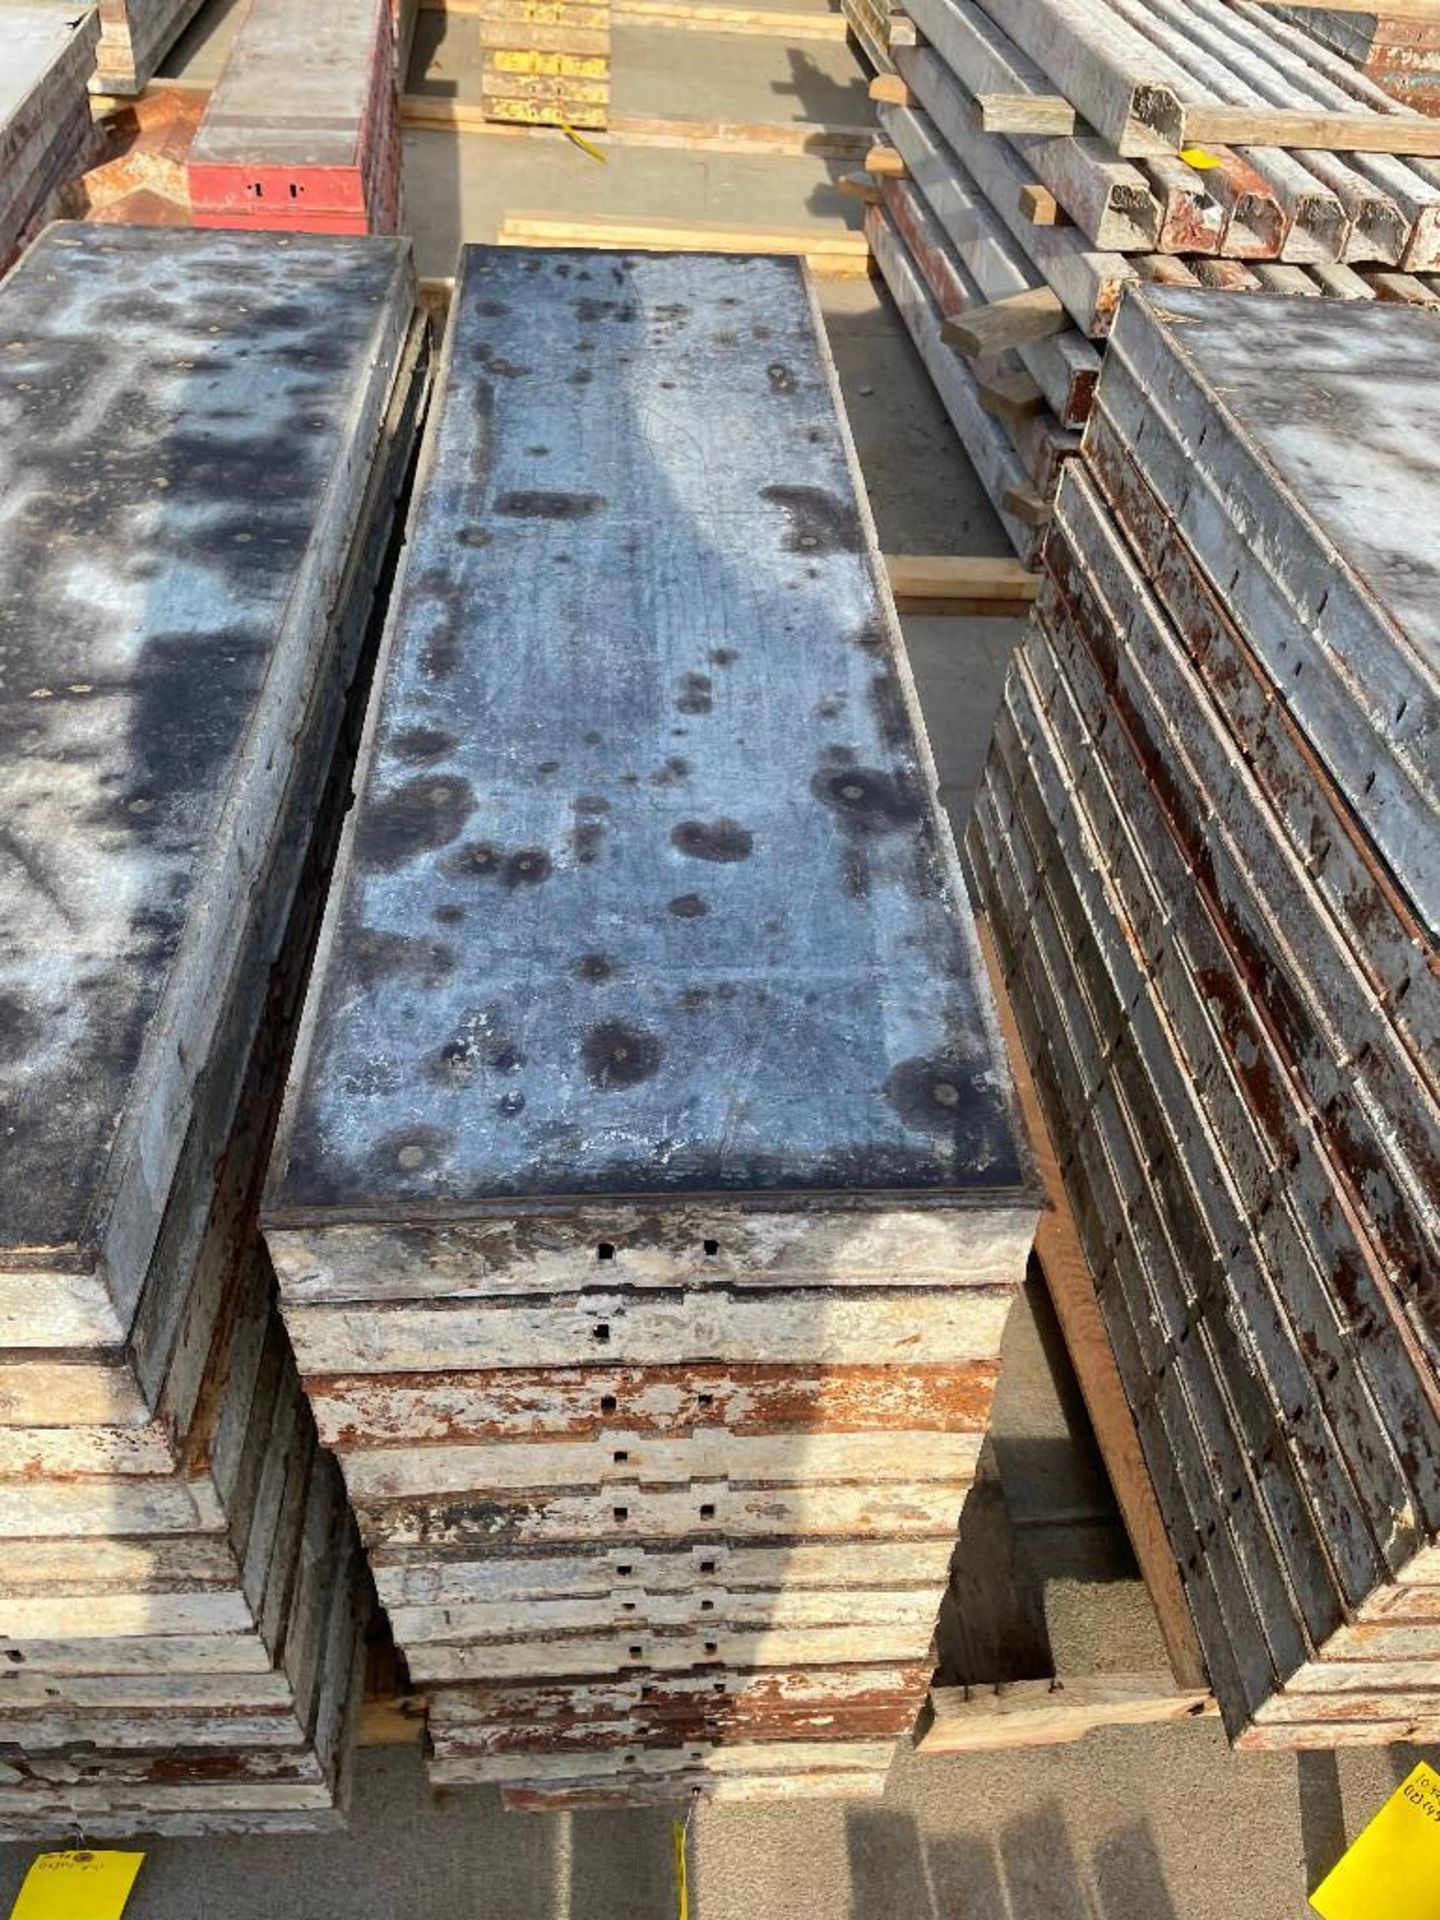 (12) Assorted Symons Steel Ply Concrete Forms. (11) 14" x 4' & (1) 12" x 4' Symons Steel Ply Concret - Image 4 of 4